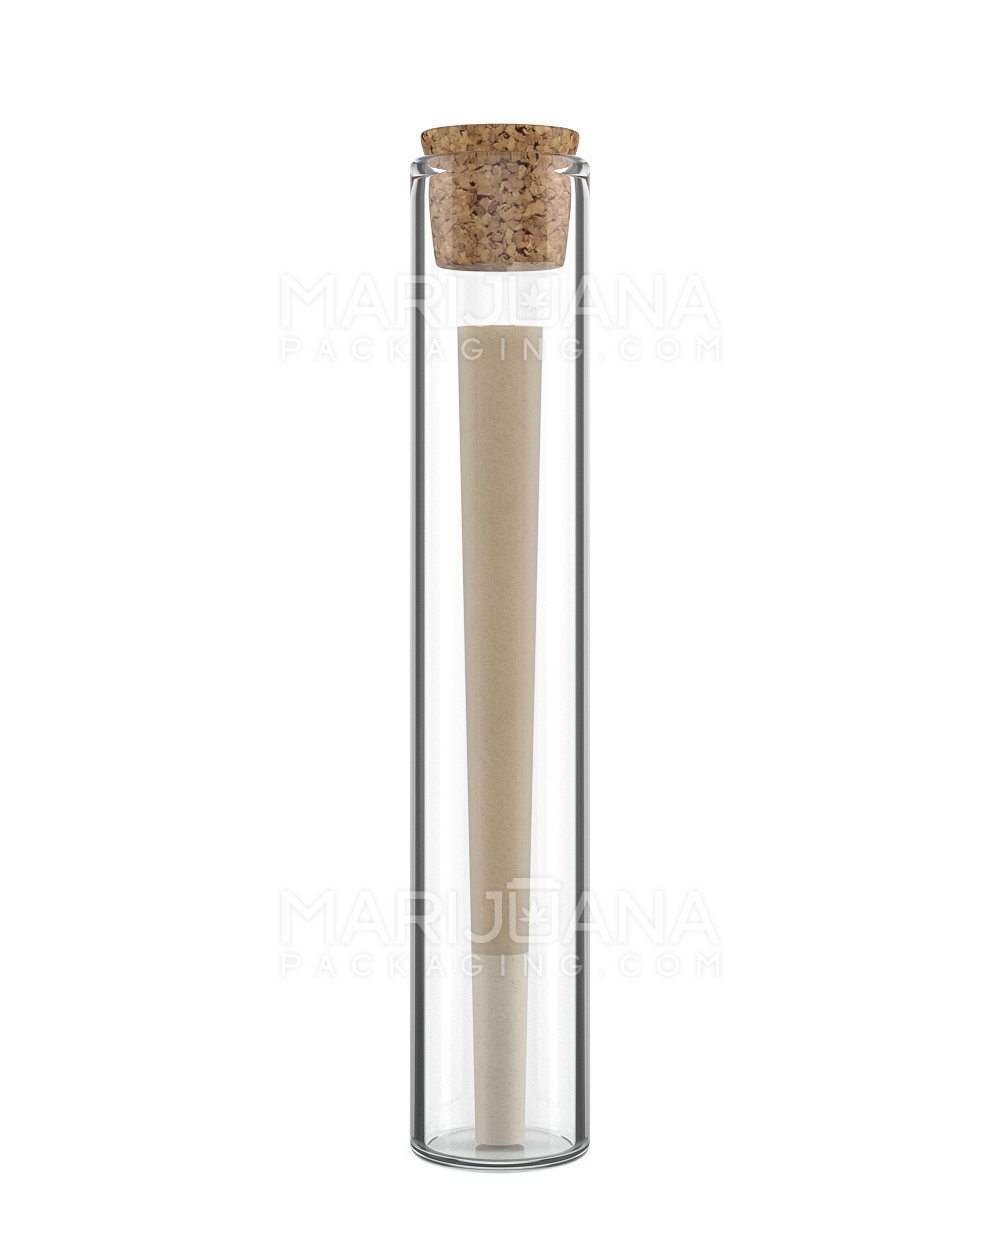 Glass Pre-Roll Tube with Cork Top | 120mm - Clear Glass - 570 Count - 2